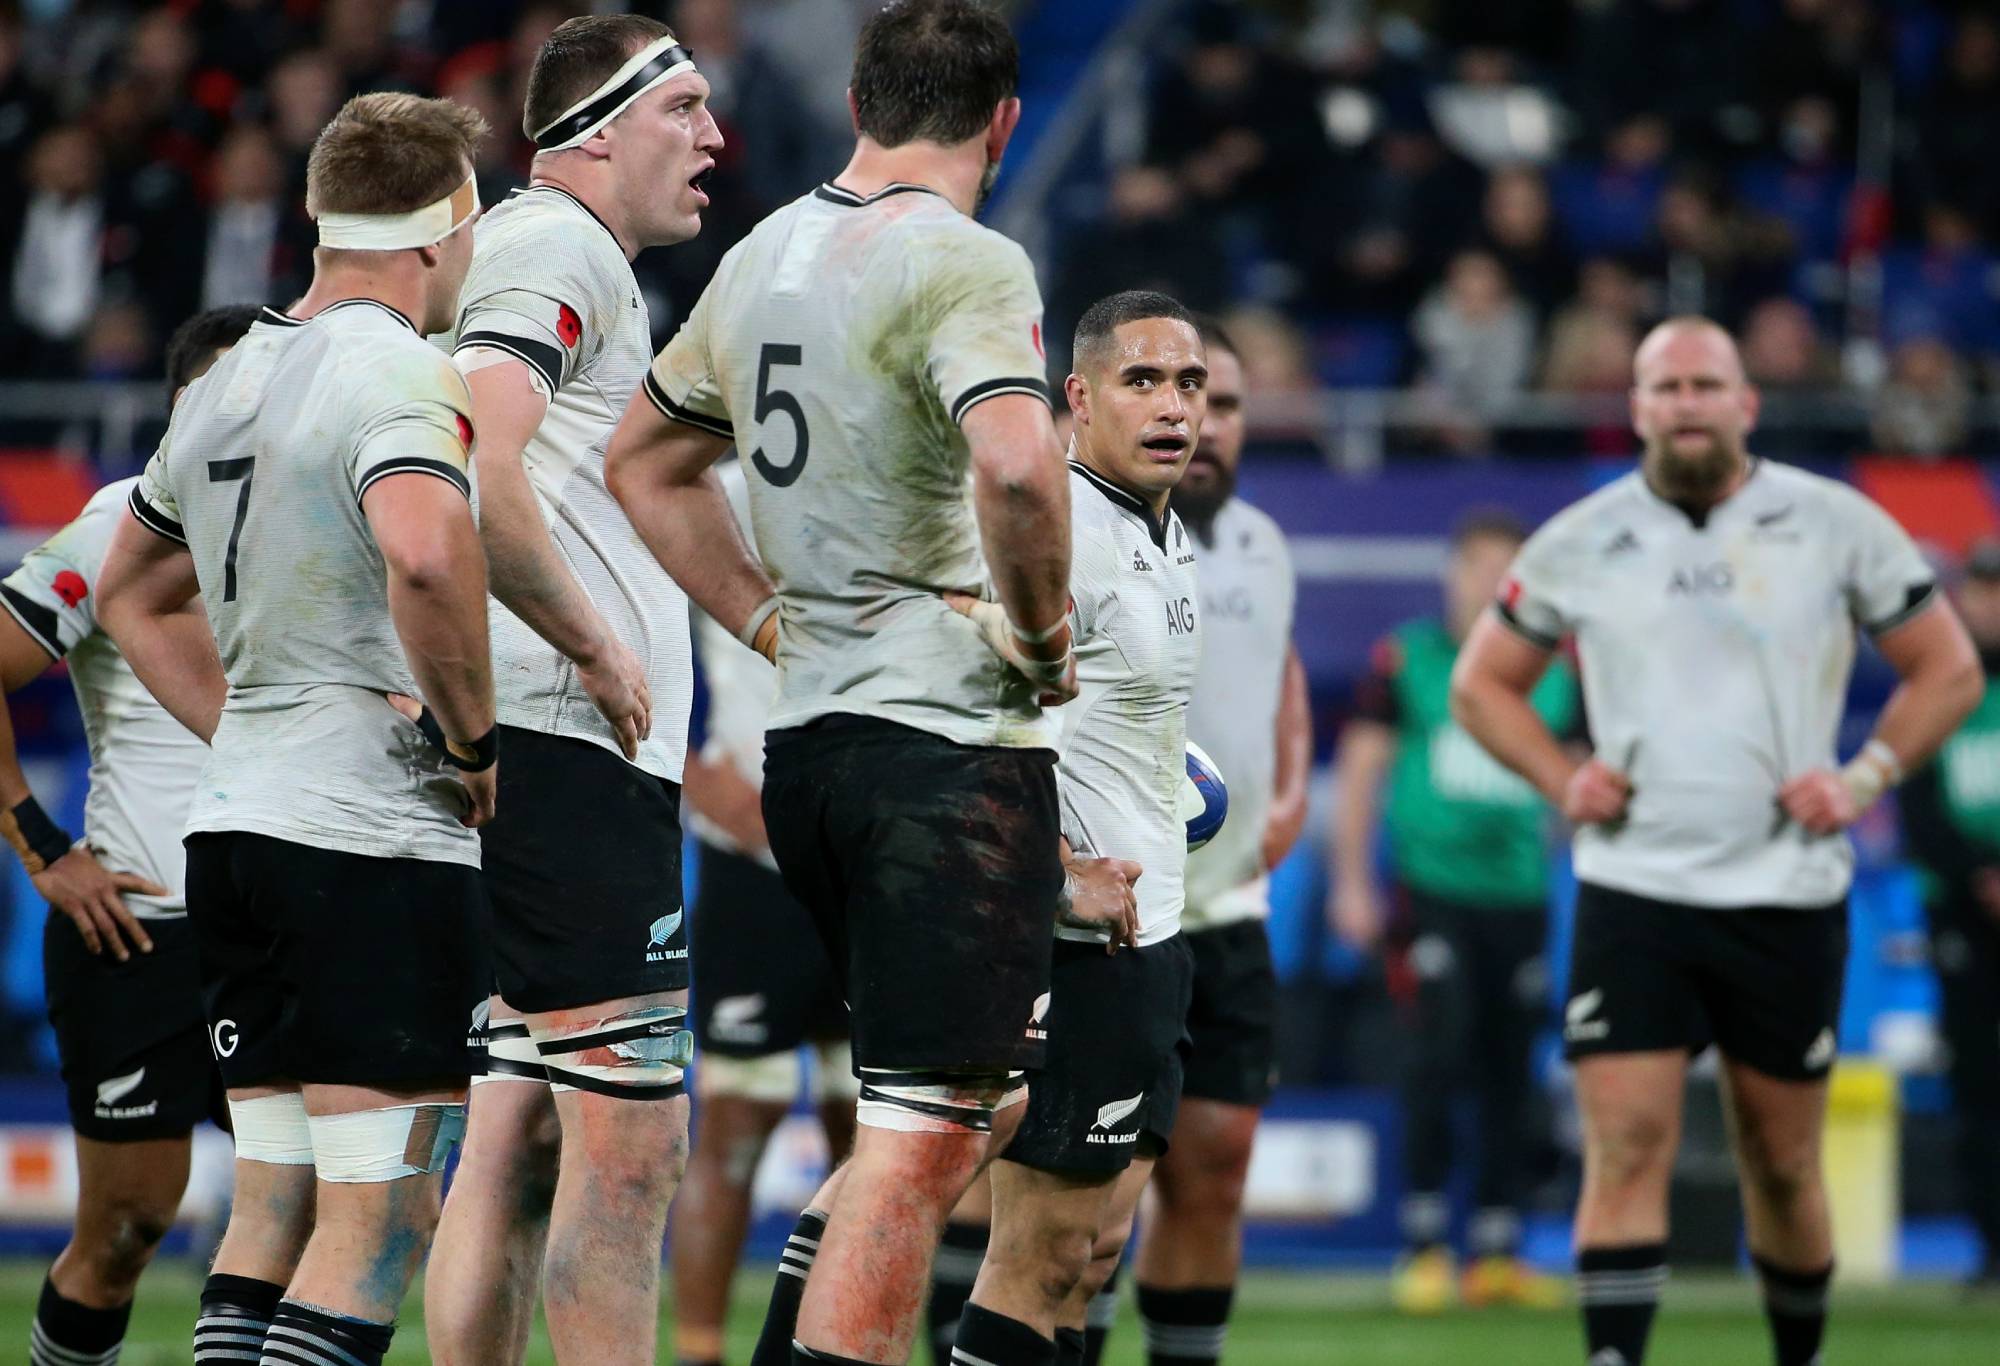 Aaron Smith, Brodie Retallick (left) of New Zealand and teammates look on during the Autumn Nations Series rugby match between France and New Zealand. (All Blacks, white jersey) at Stade de France on November 20, 2021 in Saint-Denis near Paris, France. (Photo by John Berry/Getty Images)